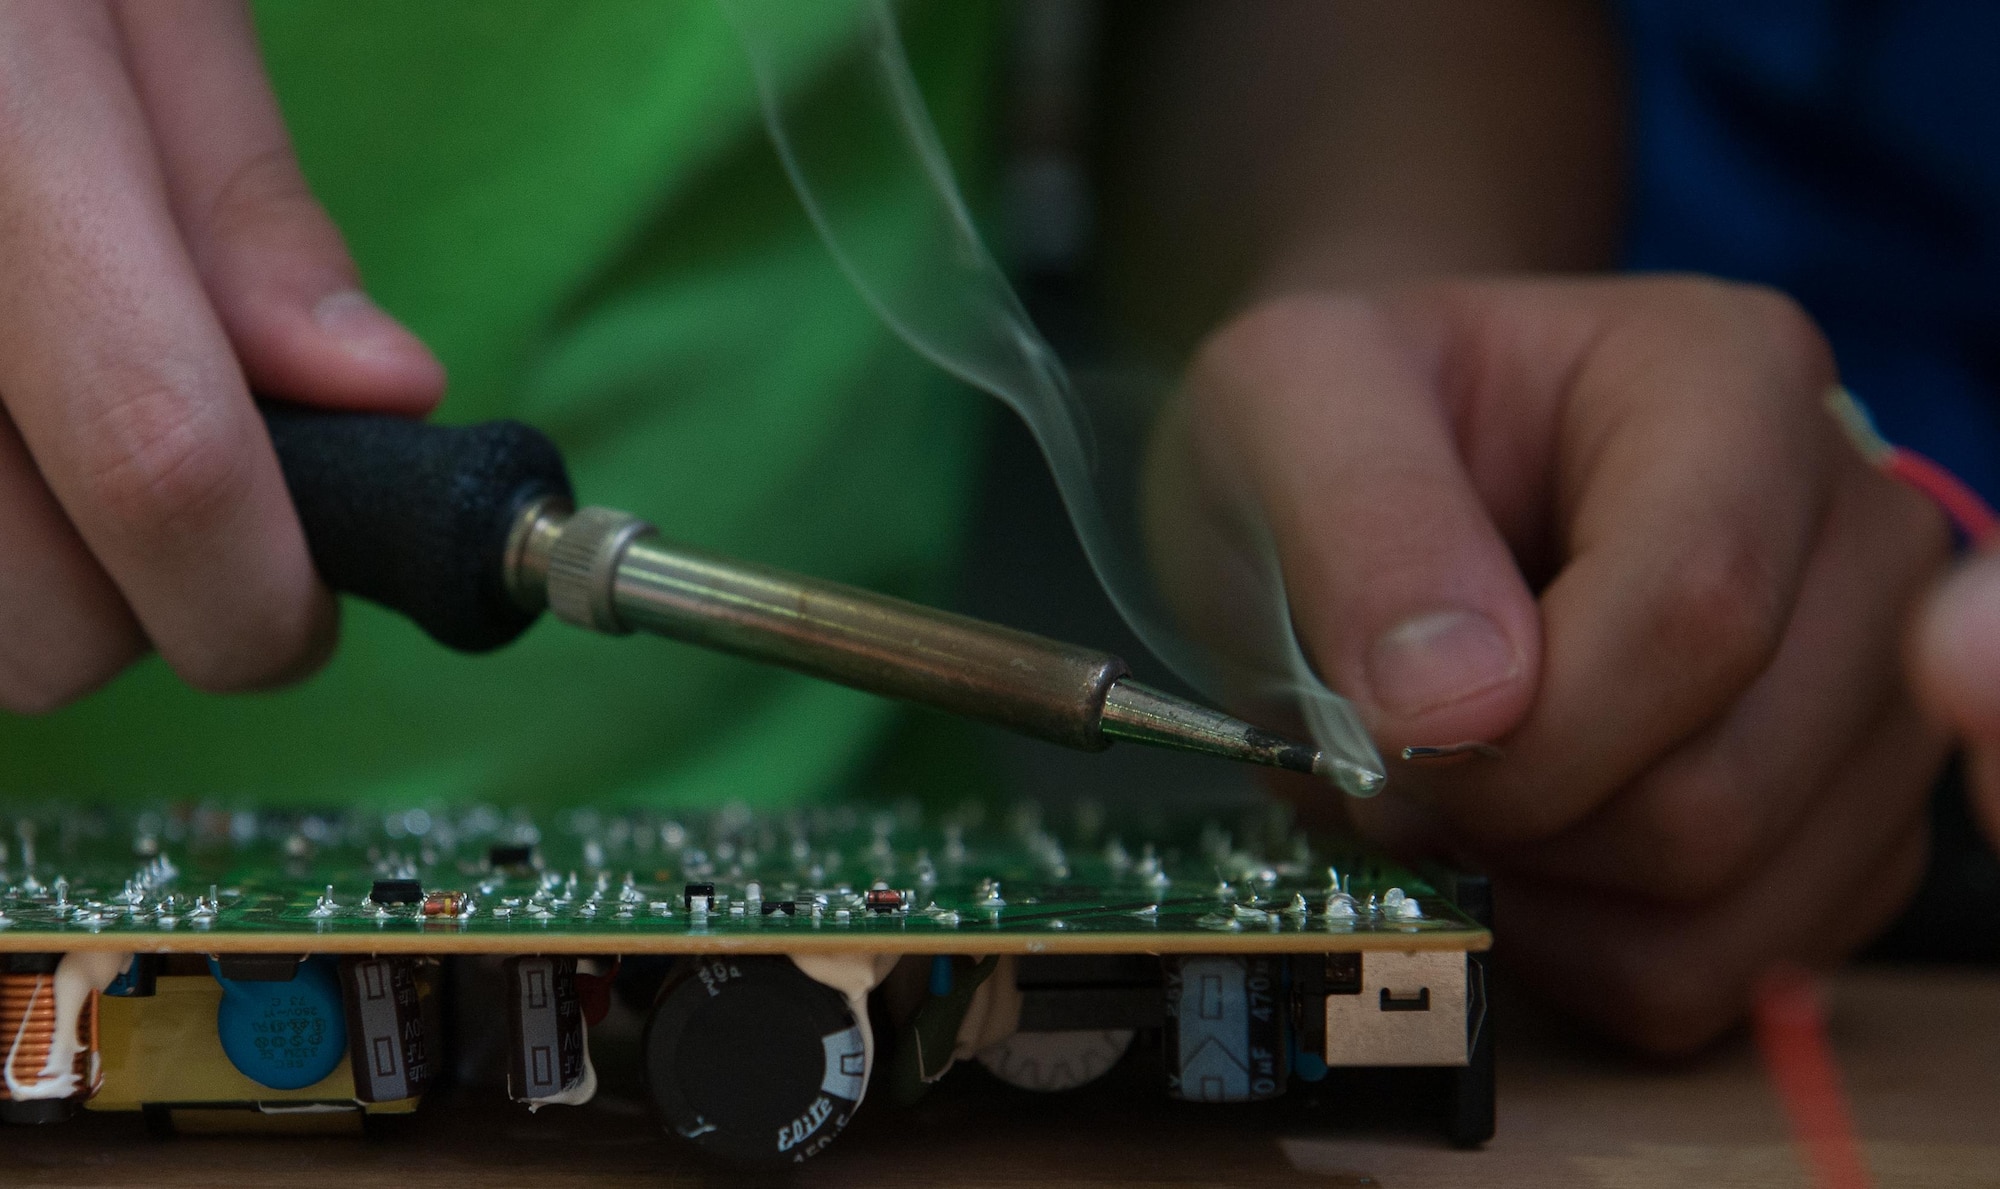 A child solders a wire into a desktop motherboard as he participates in a Science, Technology, Engineering and Mathematics youth camp July 12, 2016, at Ramstein Air Base, Germany. The camp engaged children throughout the week with brain-stimulating activities such as completing construction projects, coding computer programs and experimenting with drones.